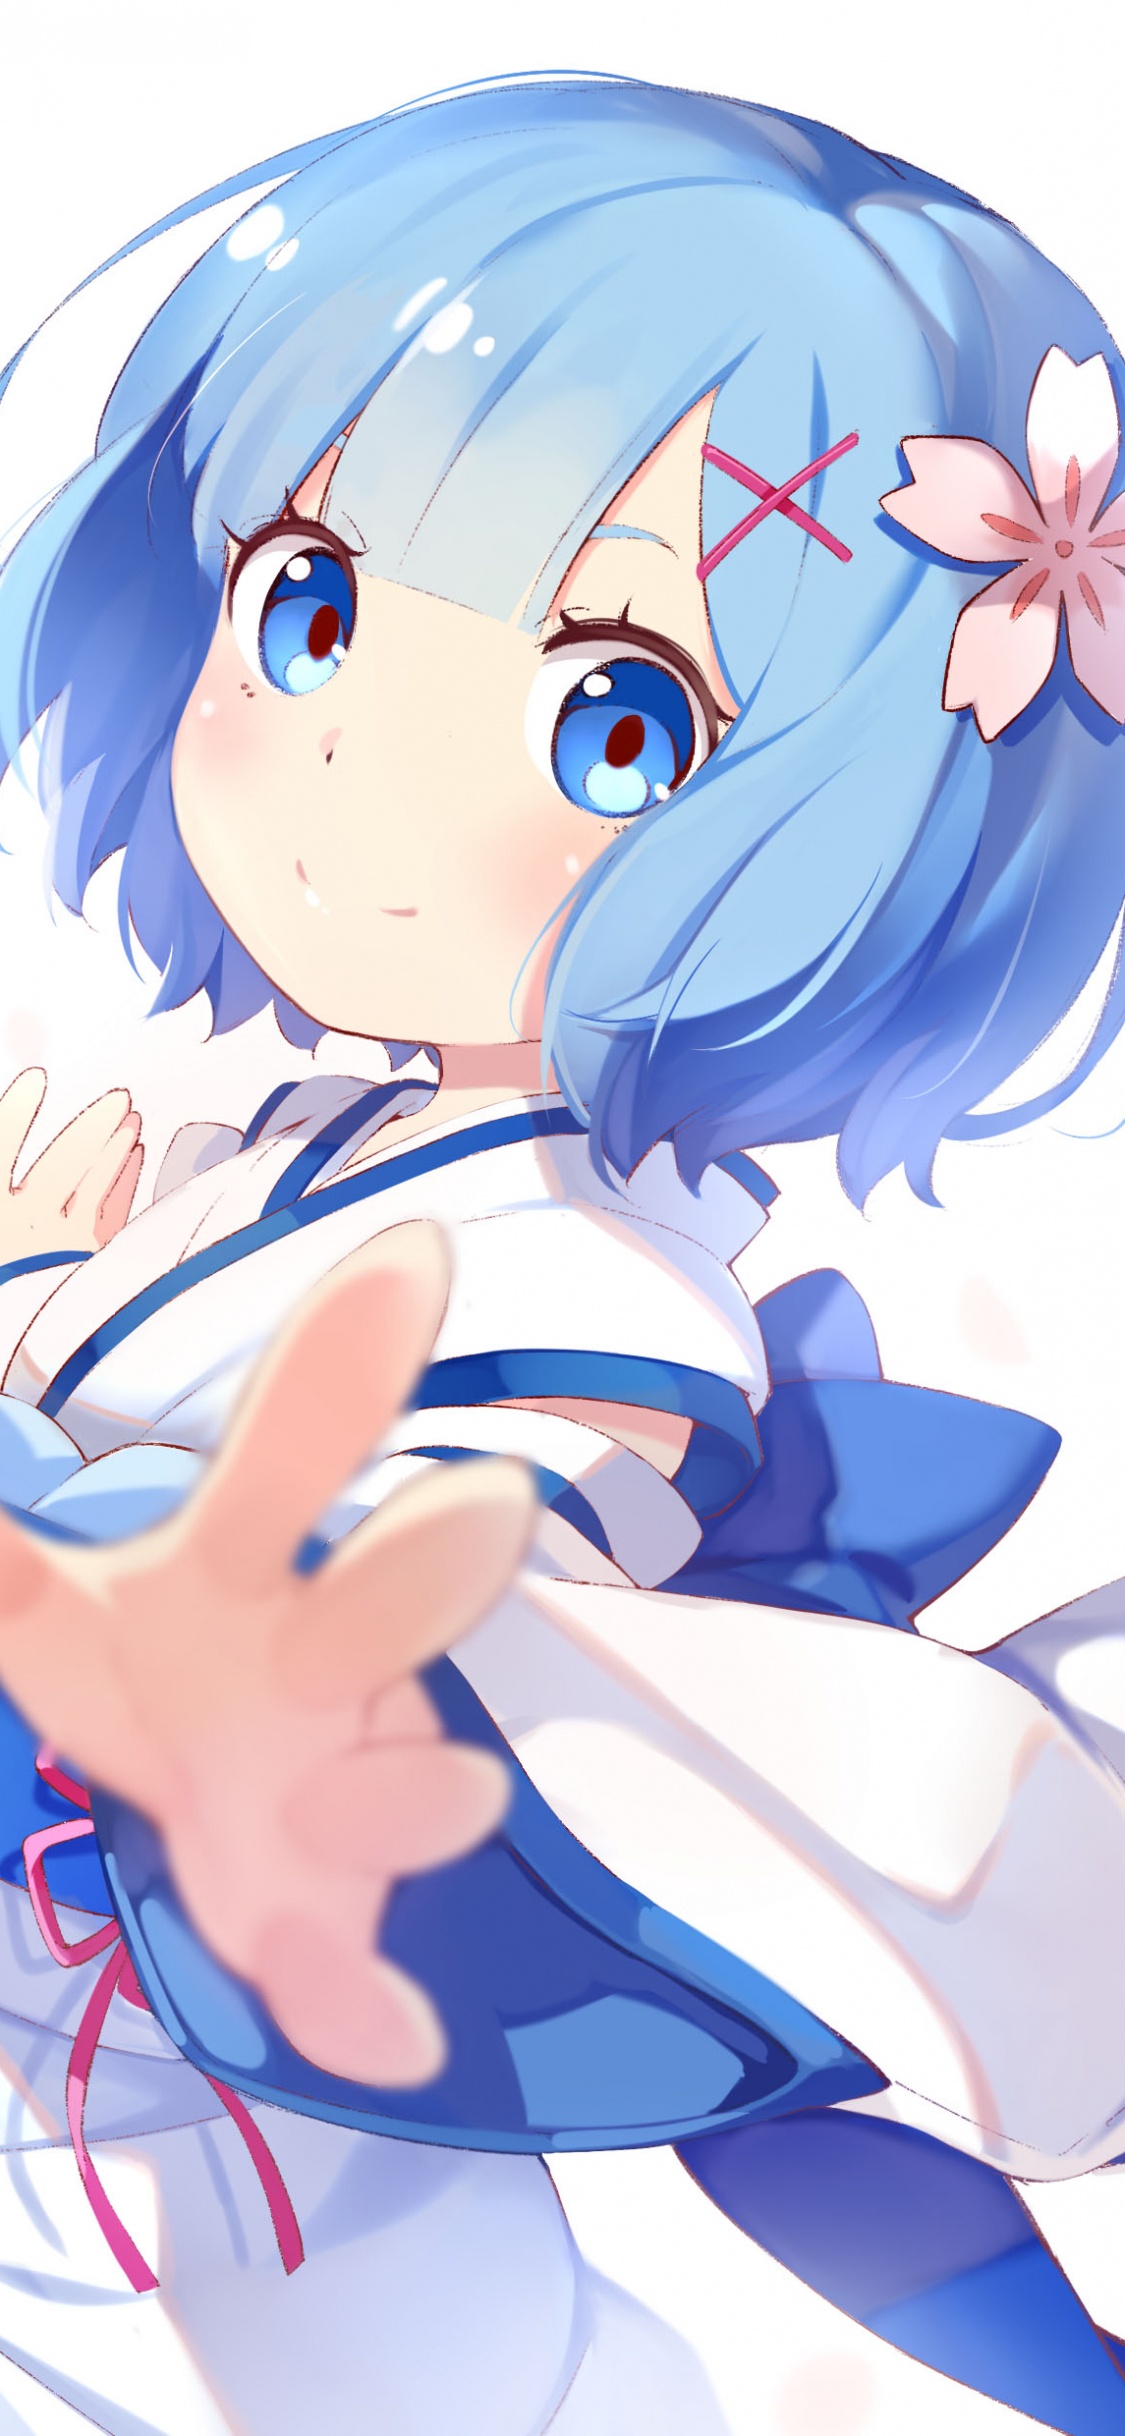 Girl in Blue Dress Anime Character. Wallpaper in 1125x2436 Resolution